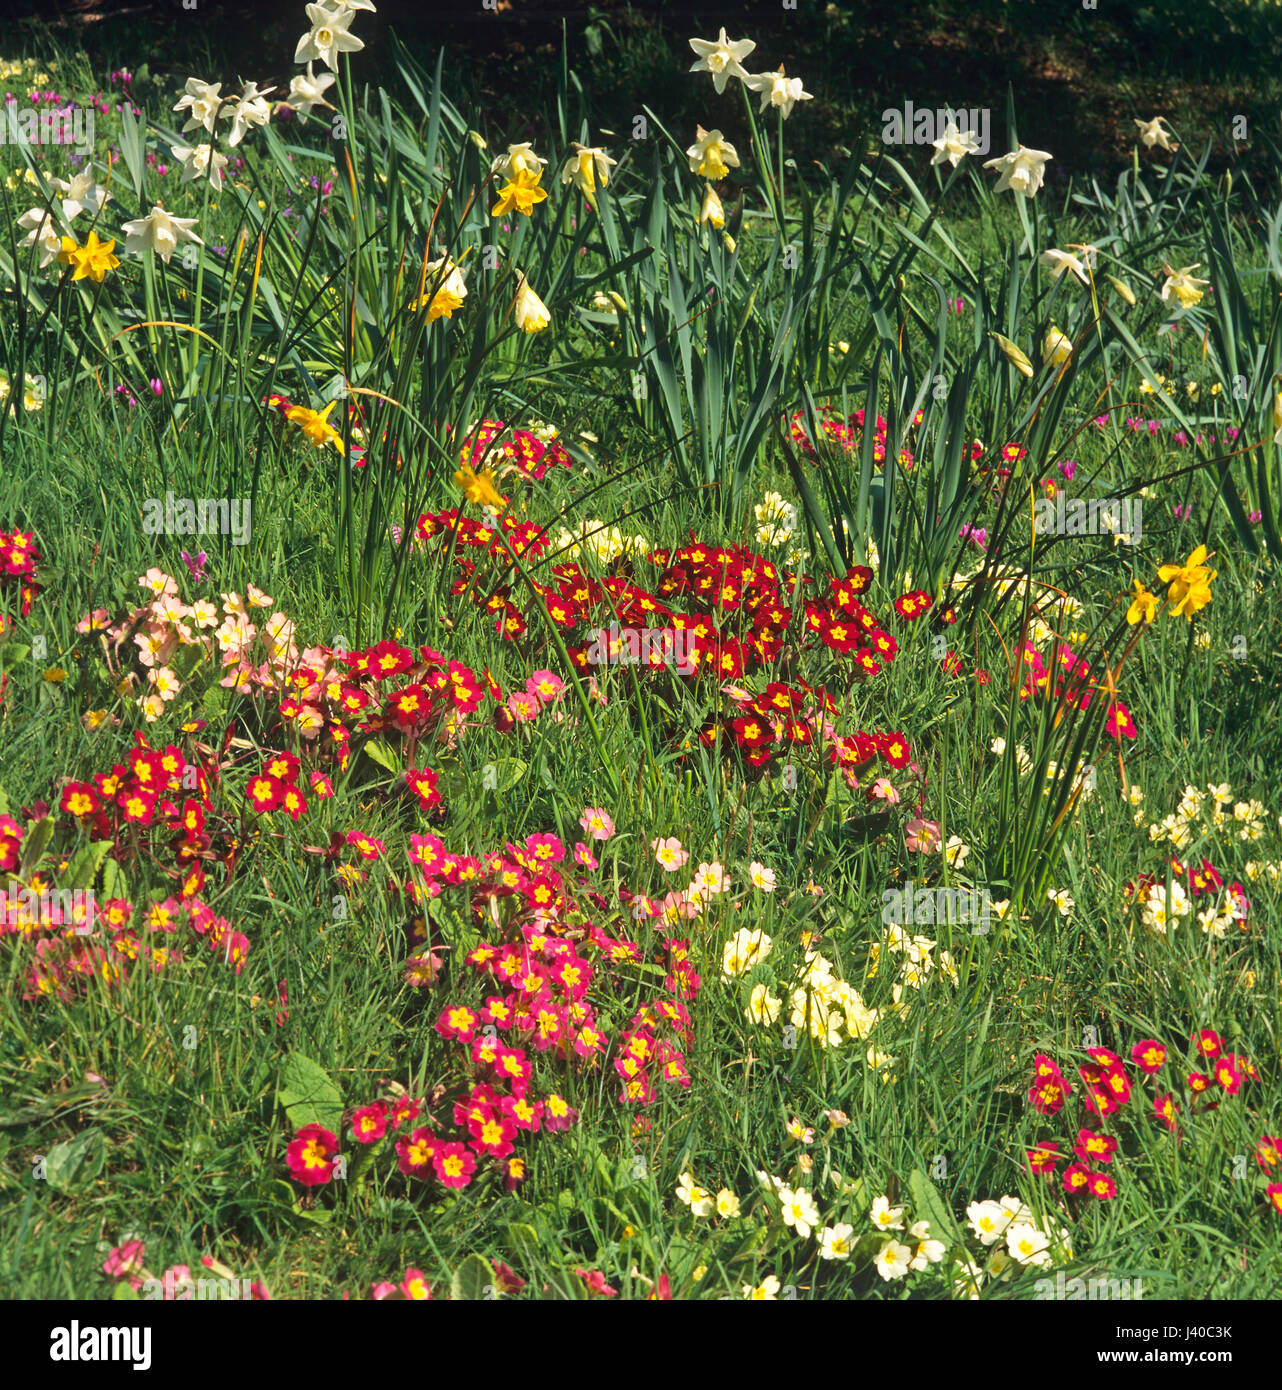 Natural planting of Primroses in a country garden Stock Photo